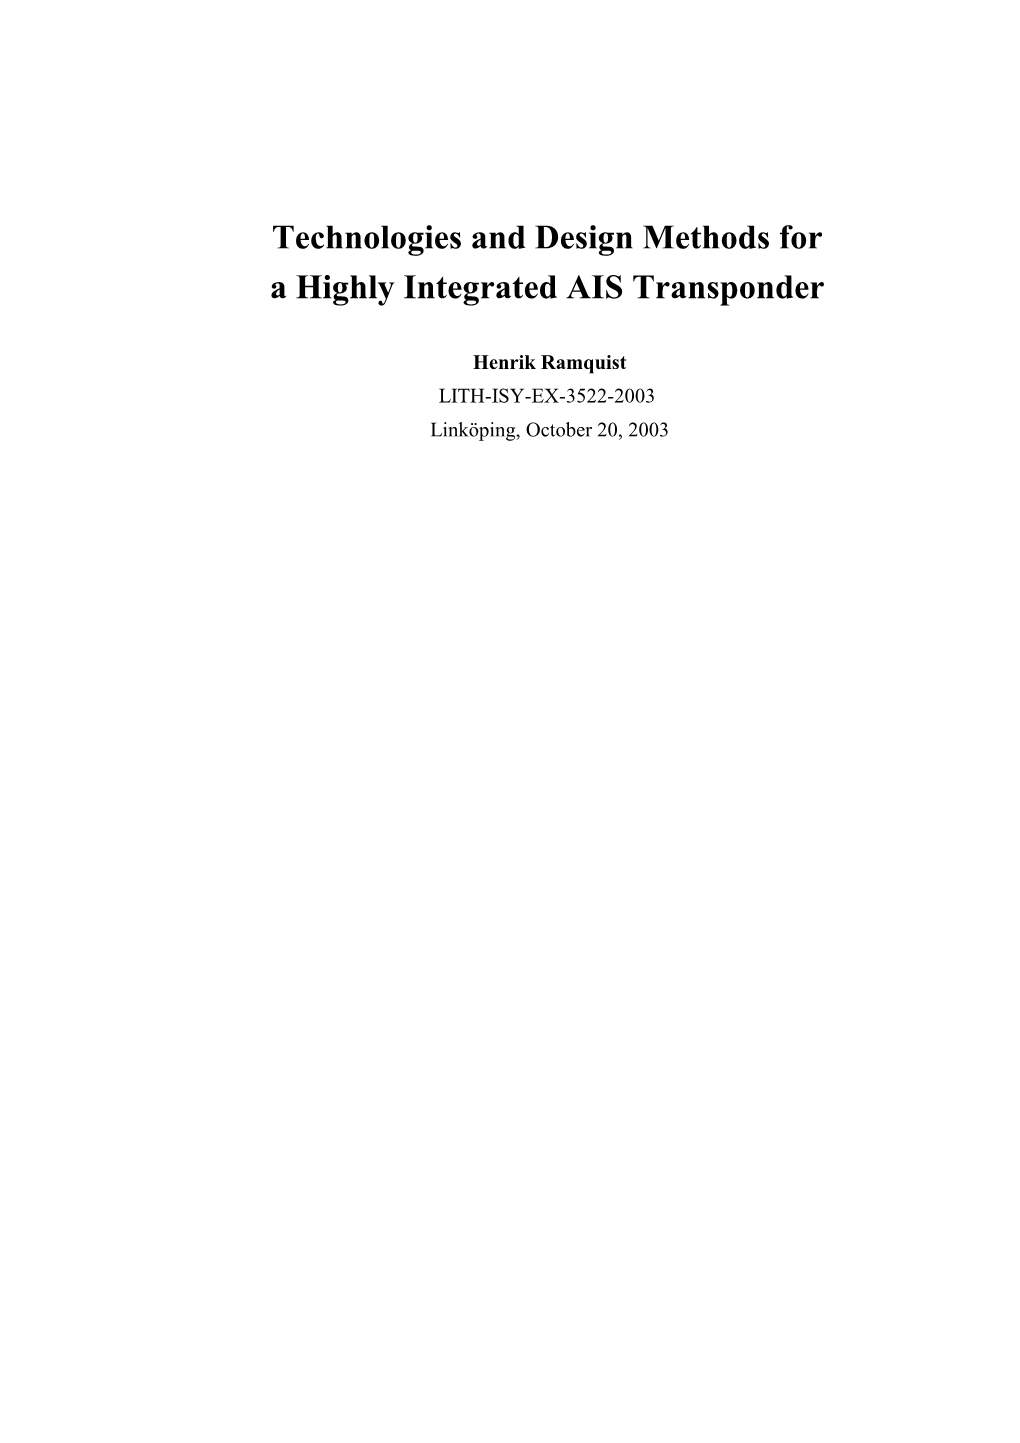 Copy of Technologies and Design Methods for a Highly Integ–